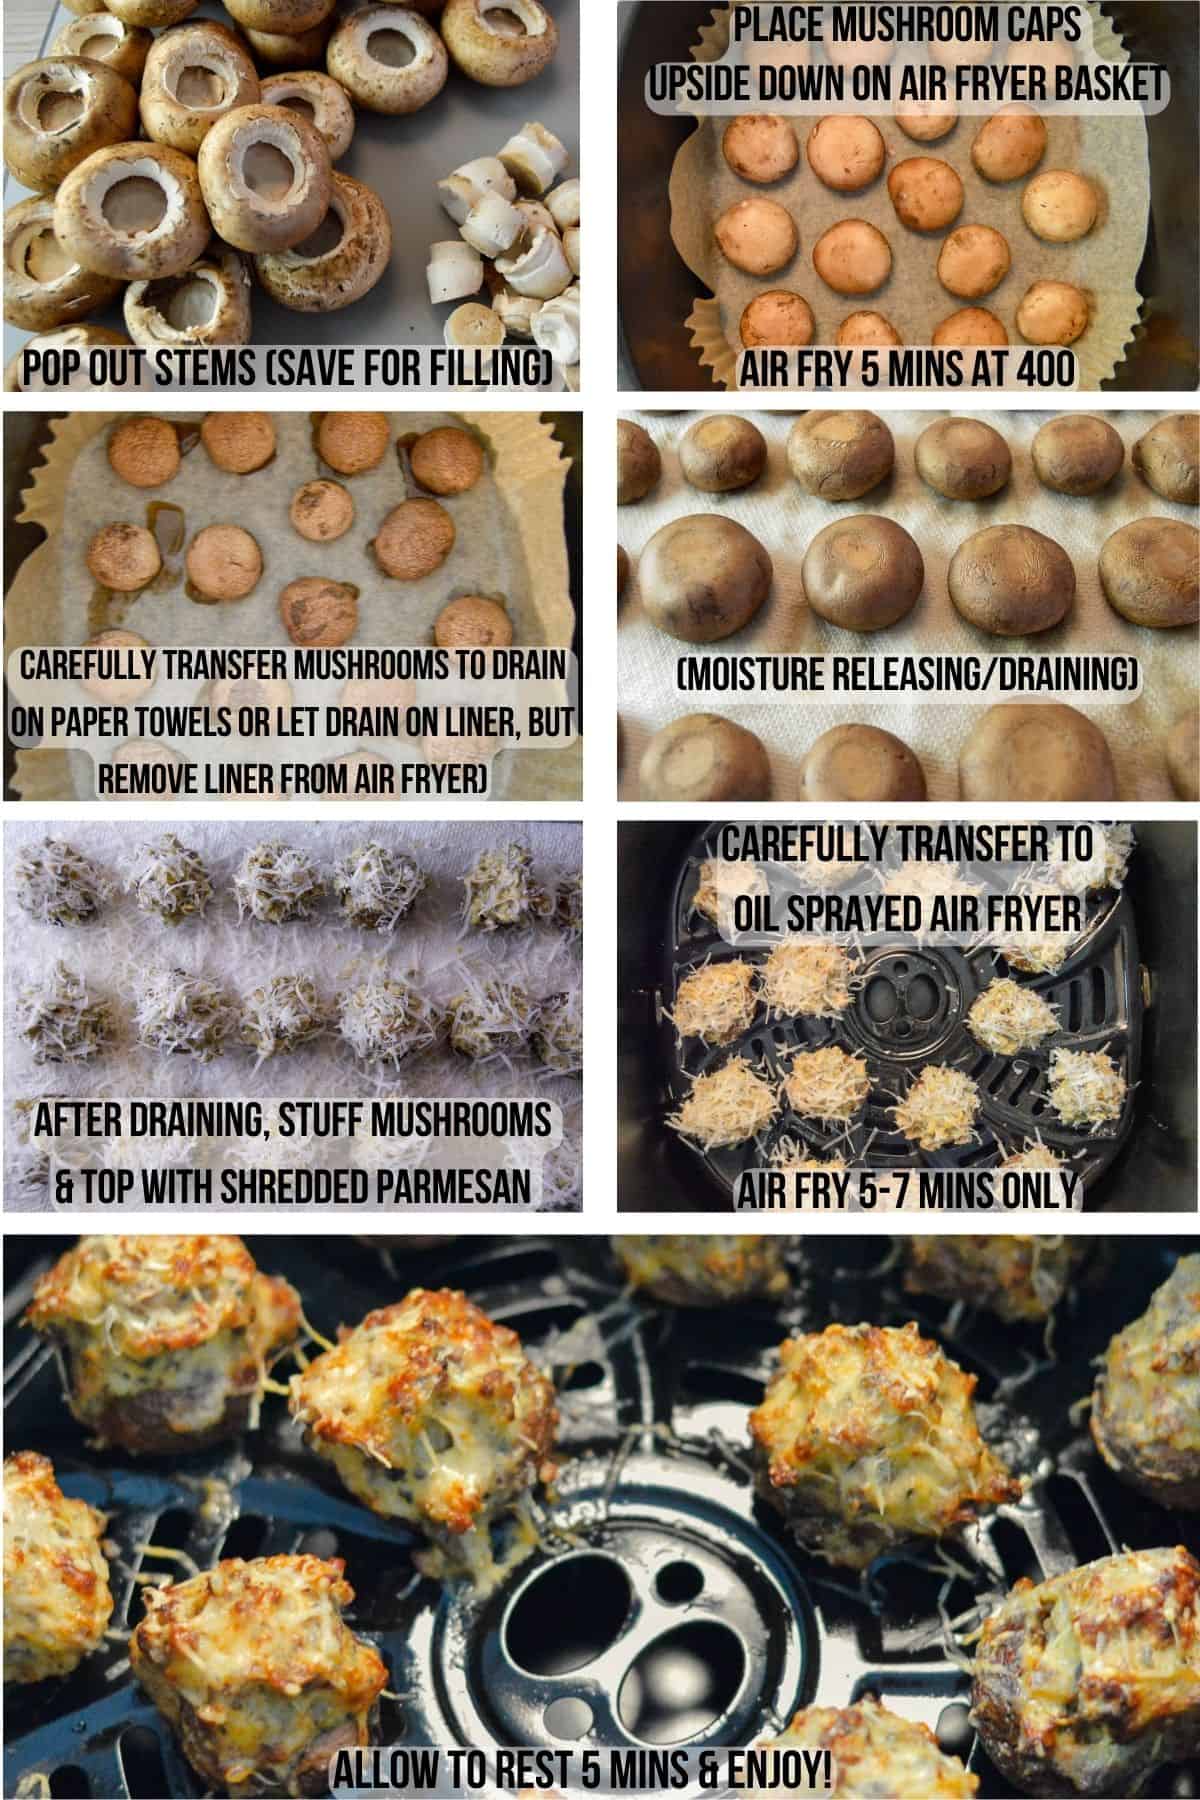 7 images in collage showing steps for making air fryer stuffed mushrooms